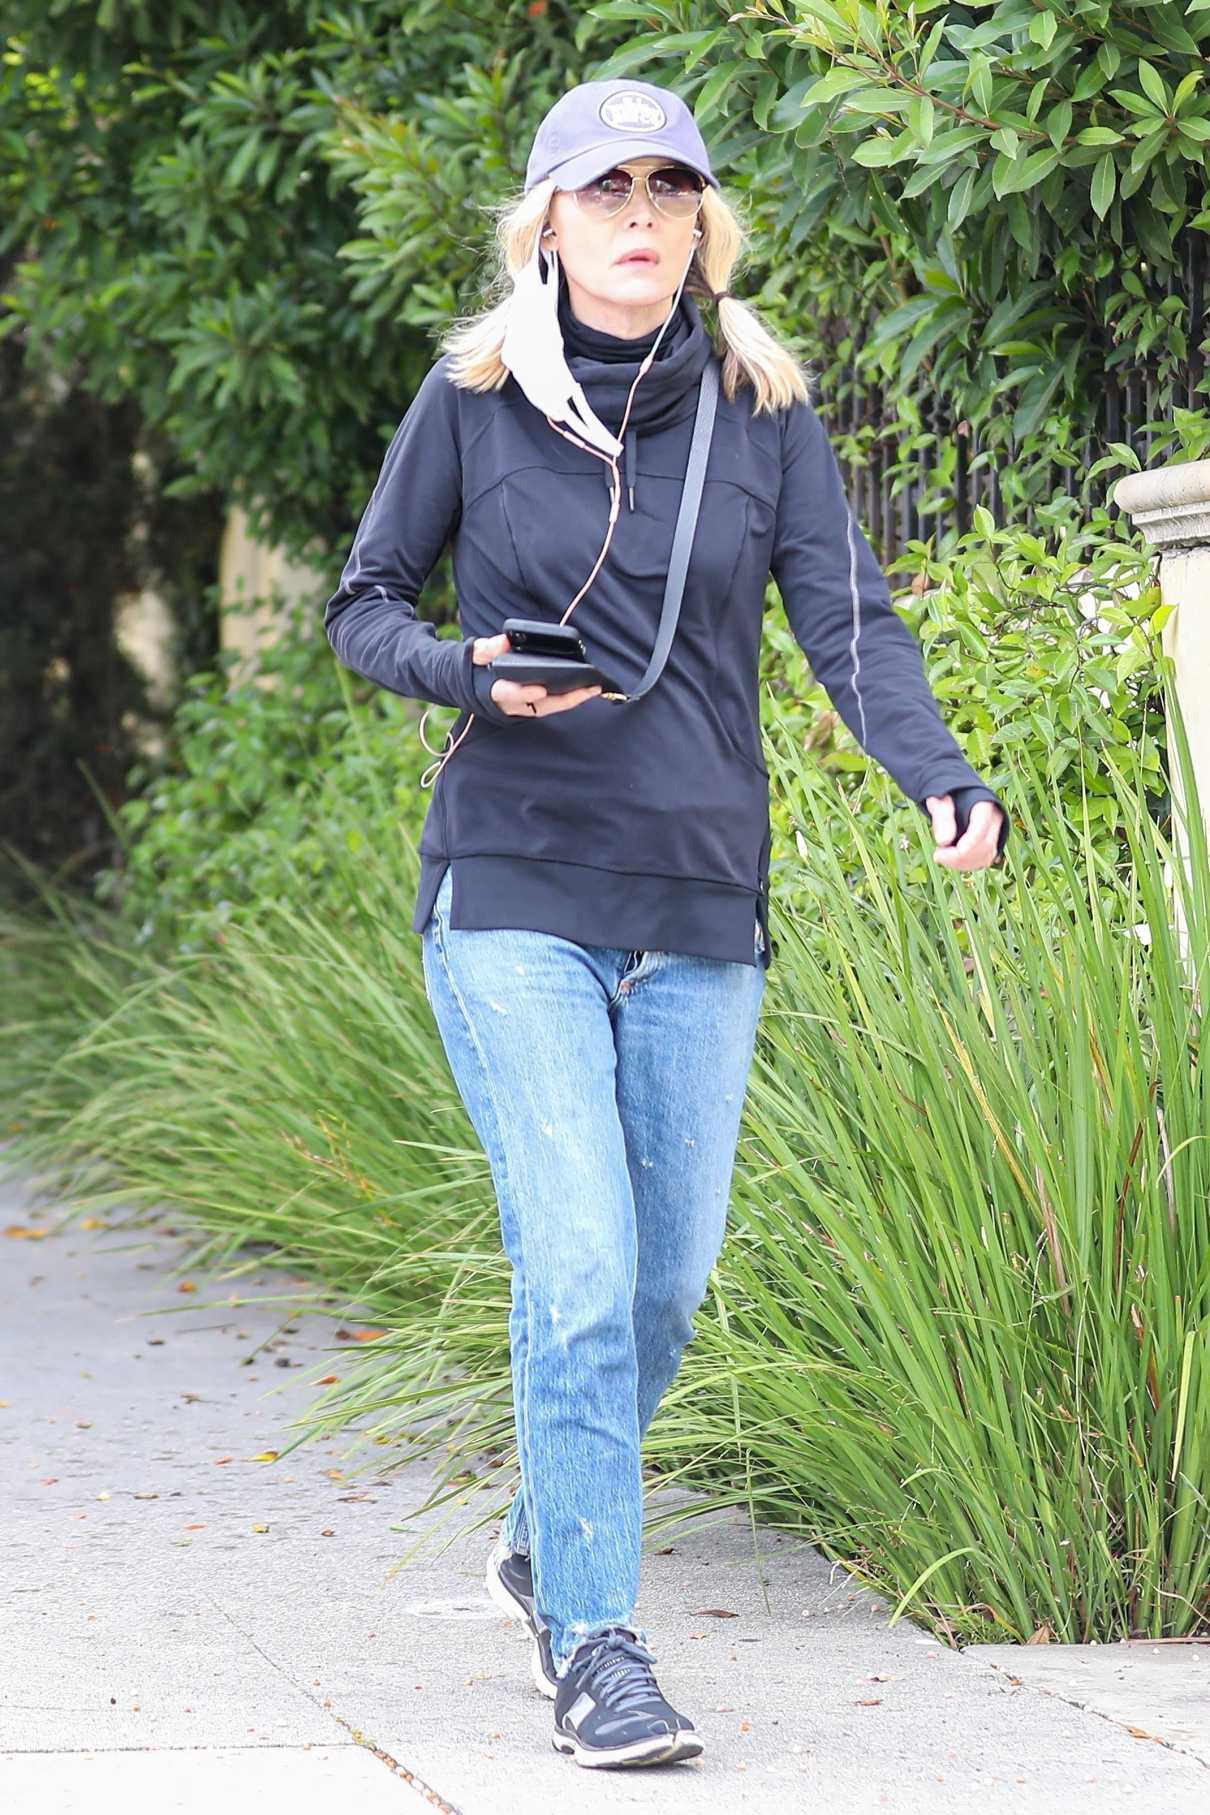 Michelle Pfeiffer in a Blue Ripped Jeans